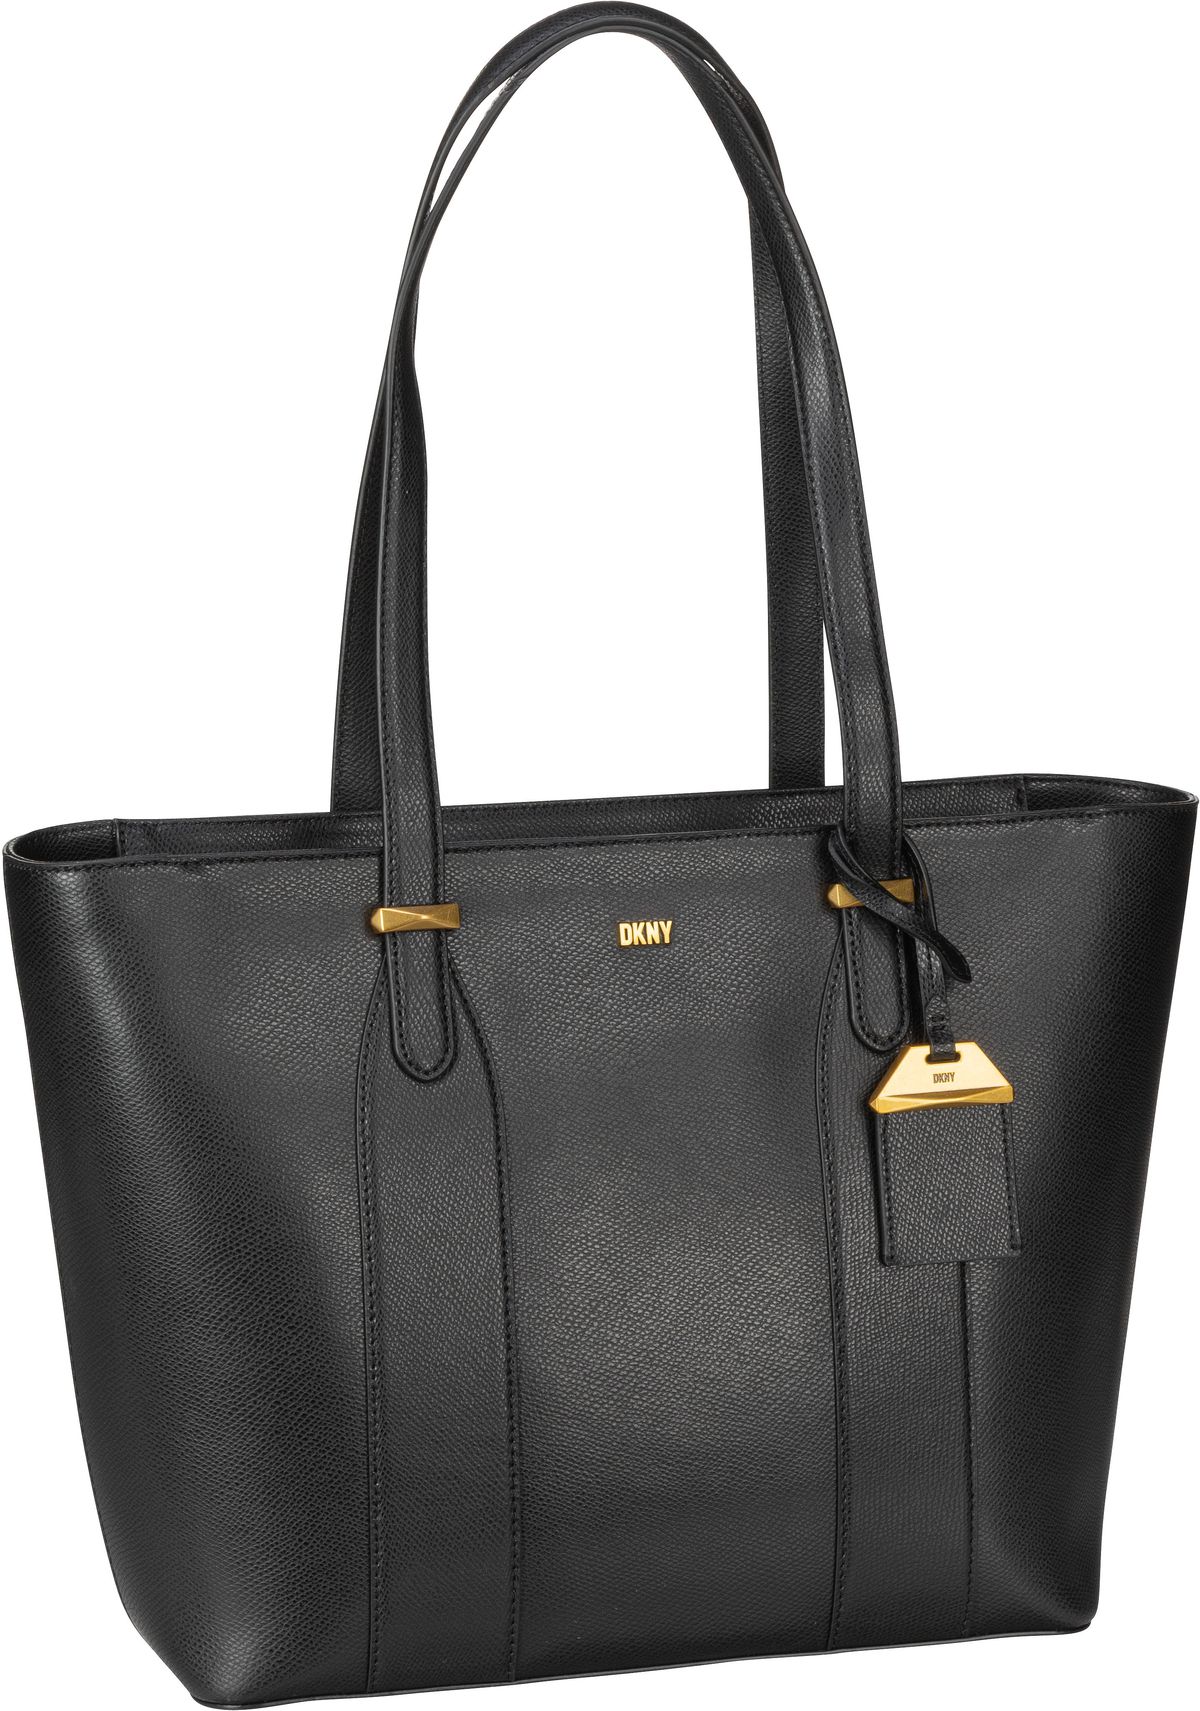 DKNY Marykate Dundee Leather Tote - Black/Gold